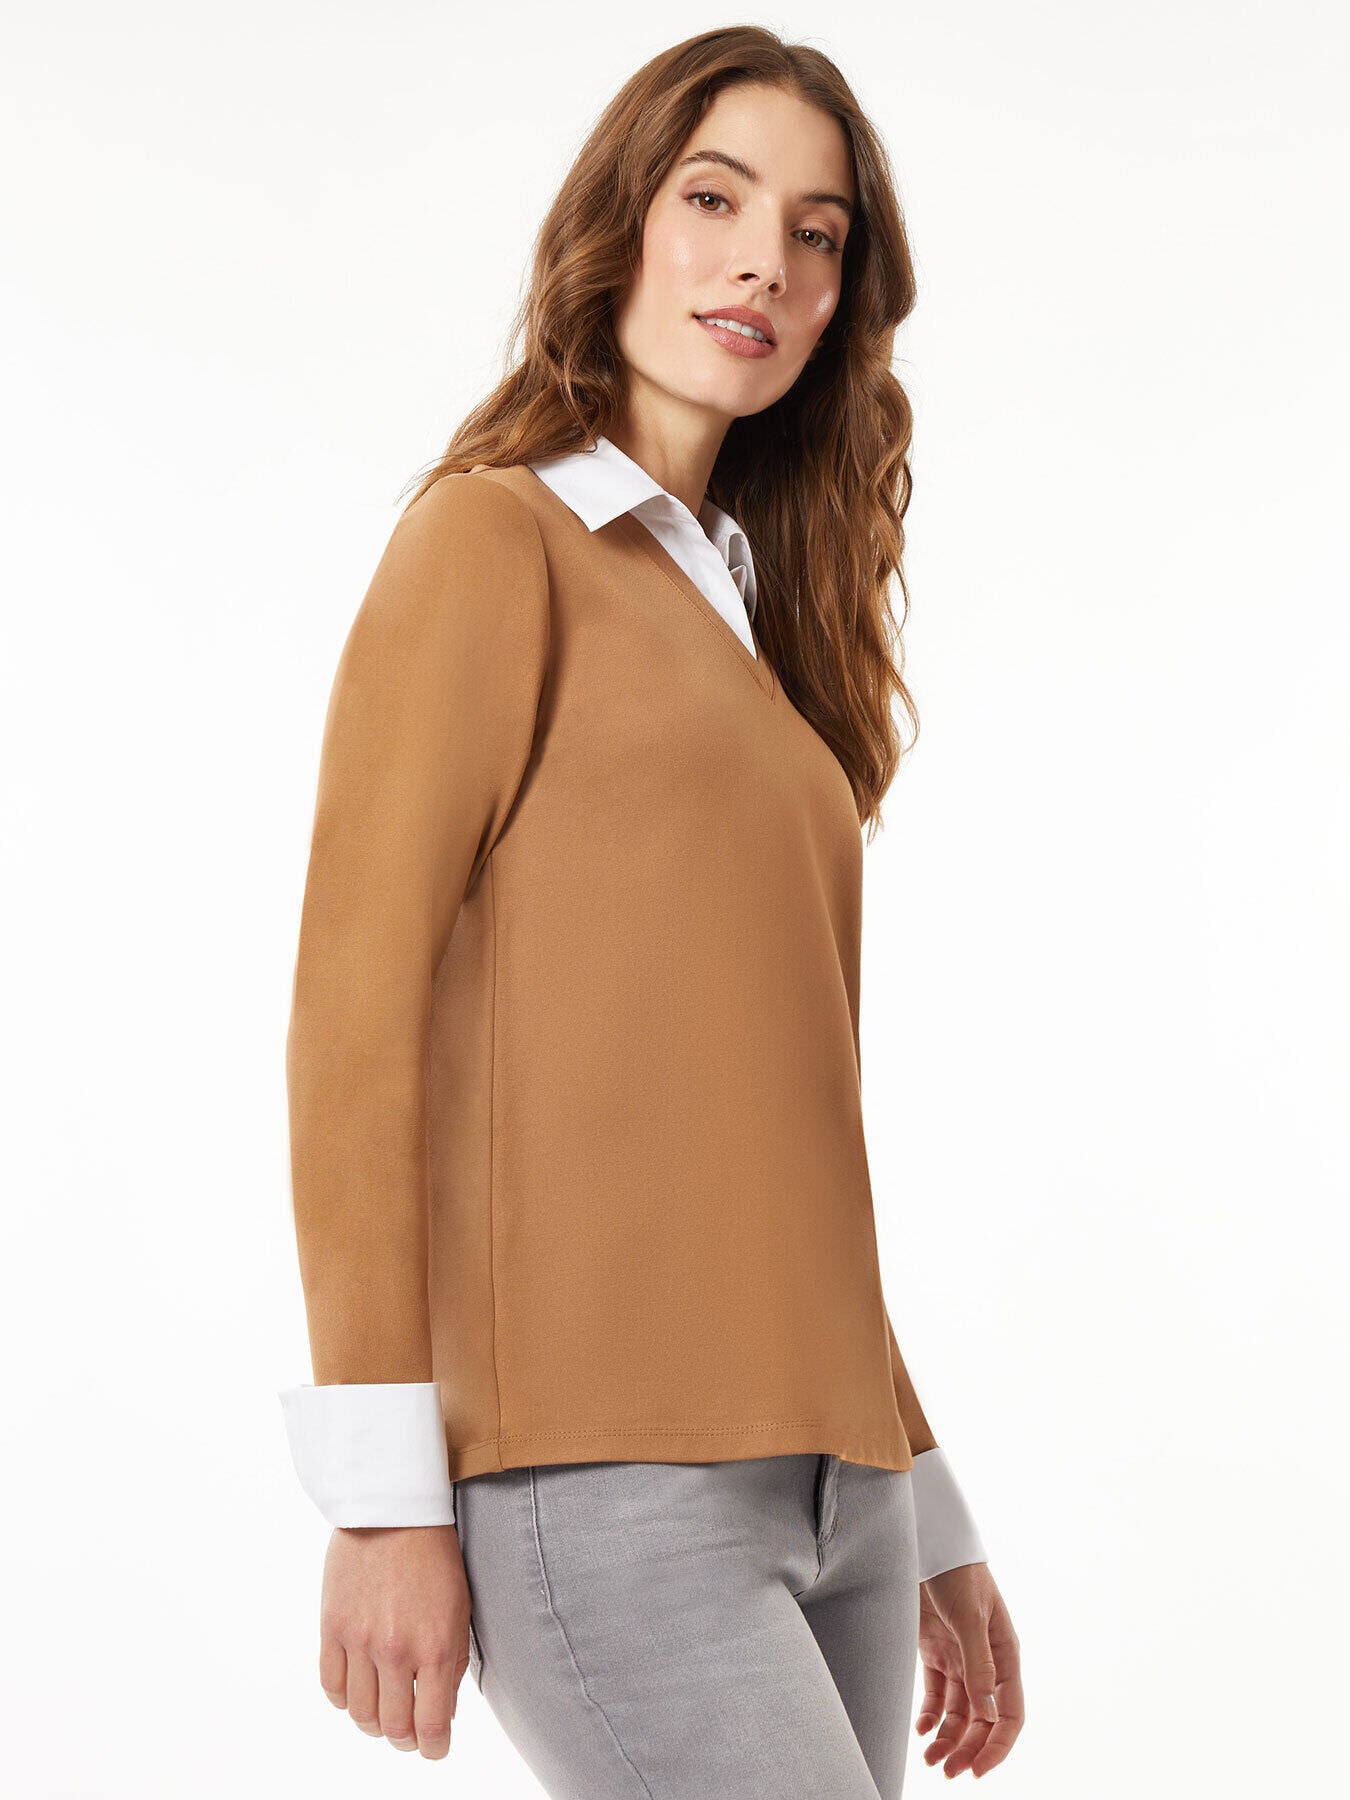 Collared Shirt V-Neck Sweater Combo Top